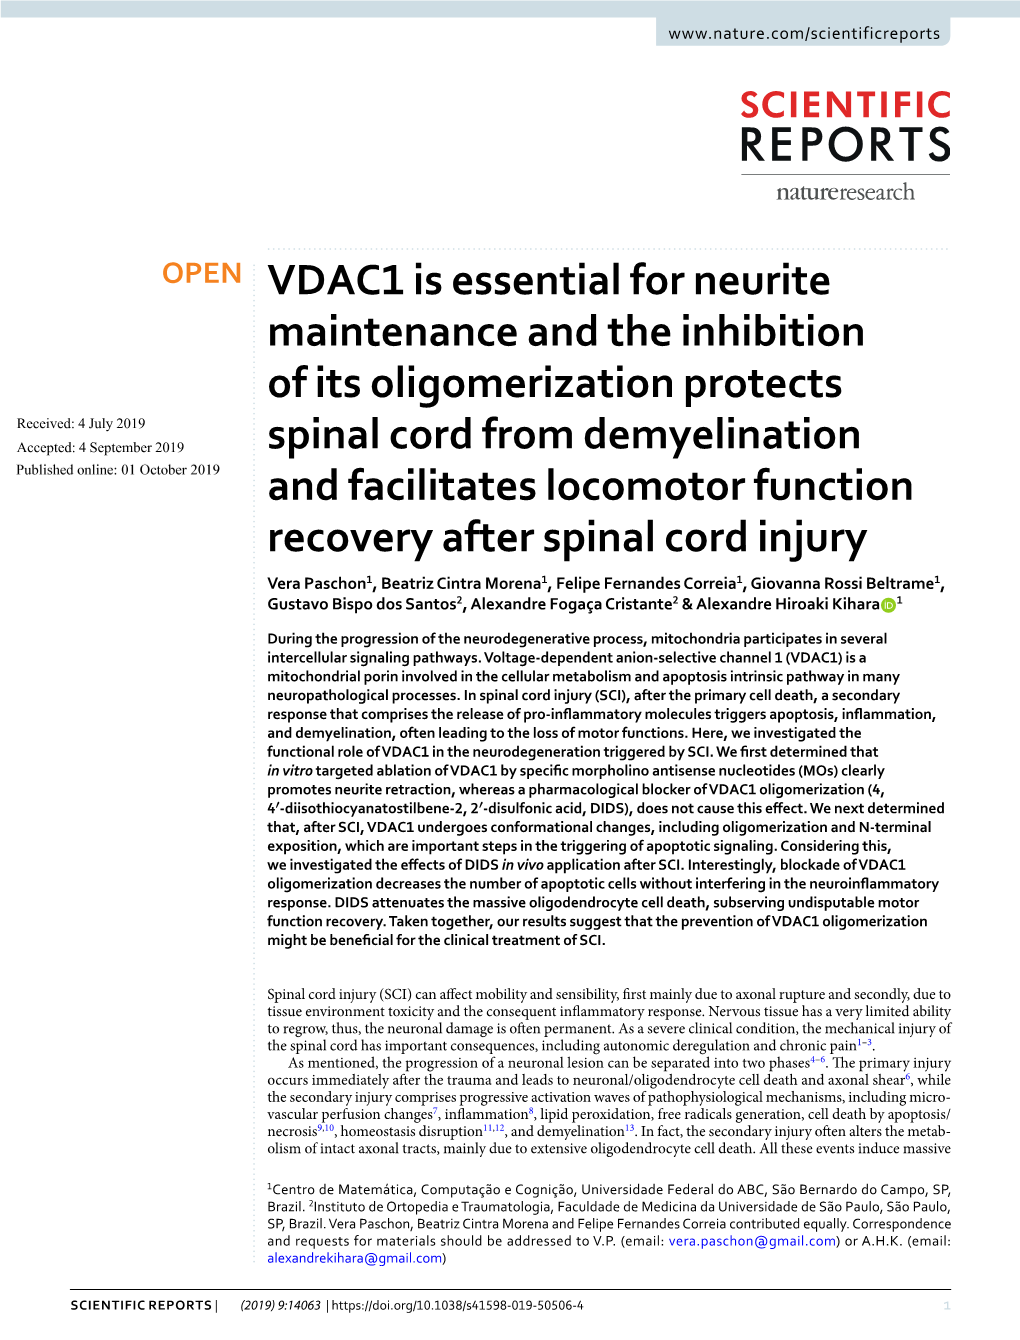 VDAC1 Is Essential for Neurite Maintenance and the Inhibition Of